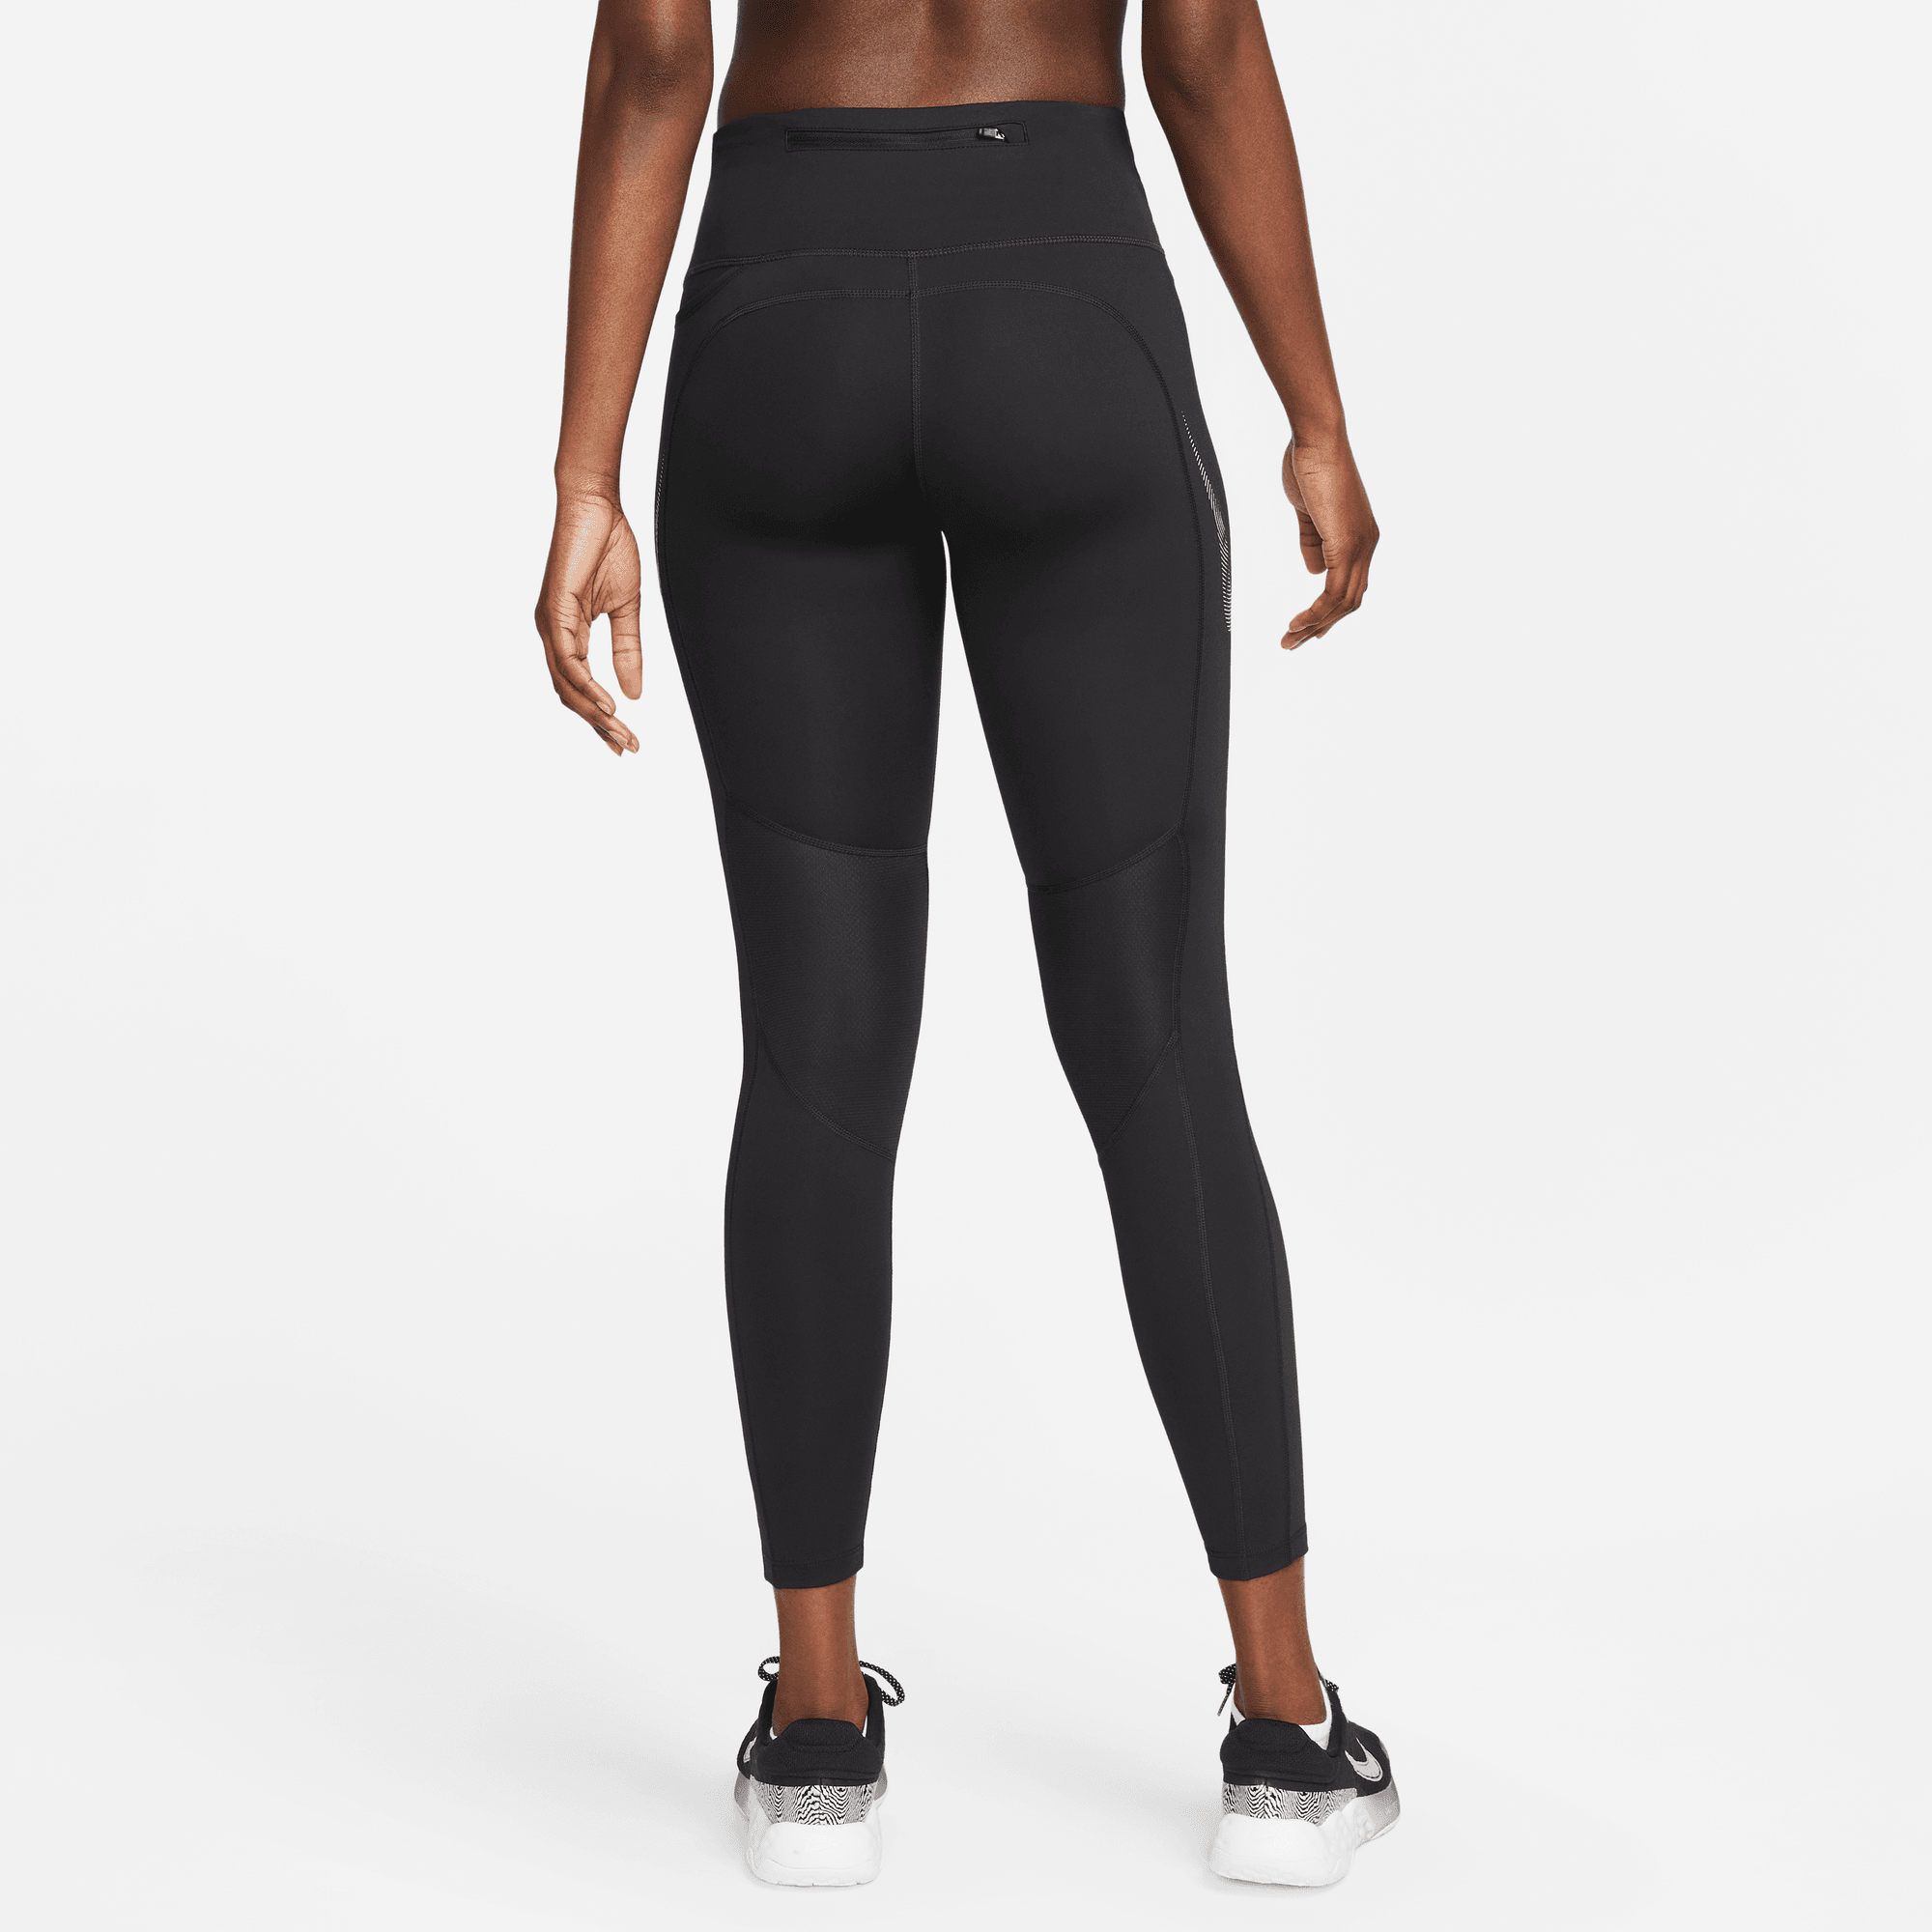 Nike Fast Swoosh Women's Mid-Rise 7/8 Printed Running Leggings with  Pockets. Nike ID